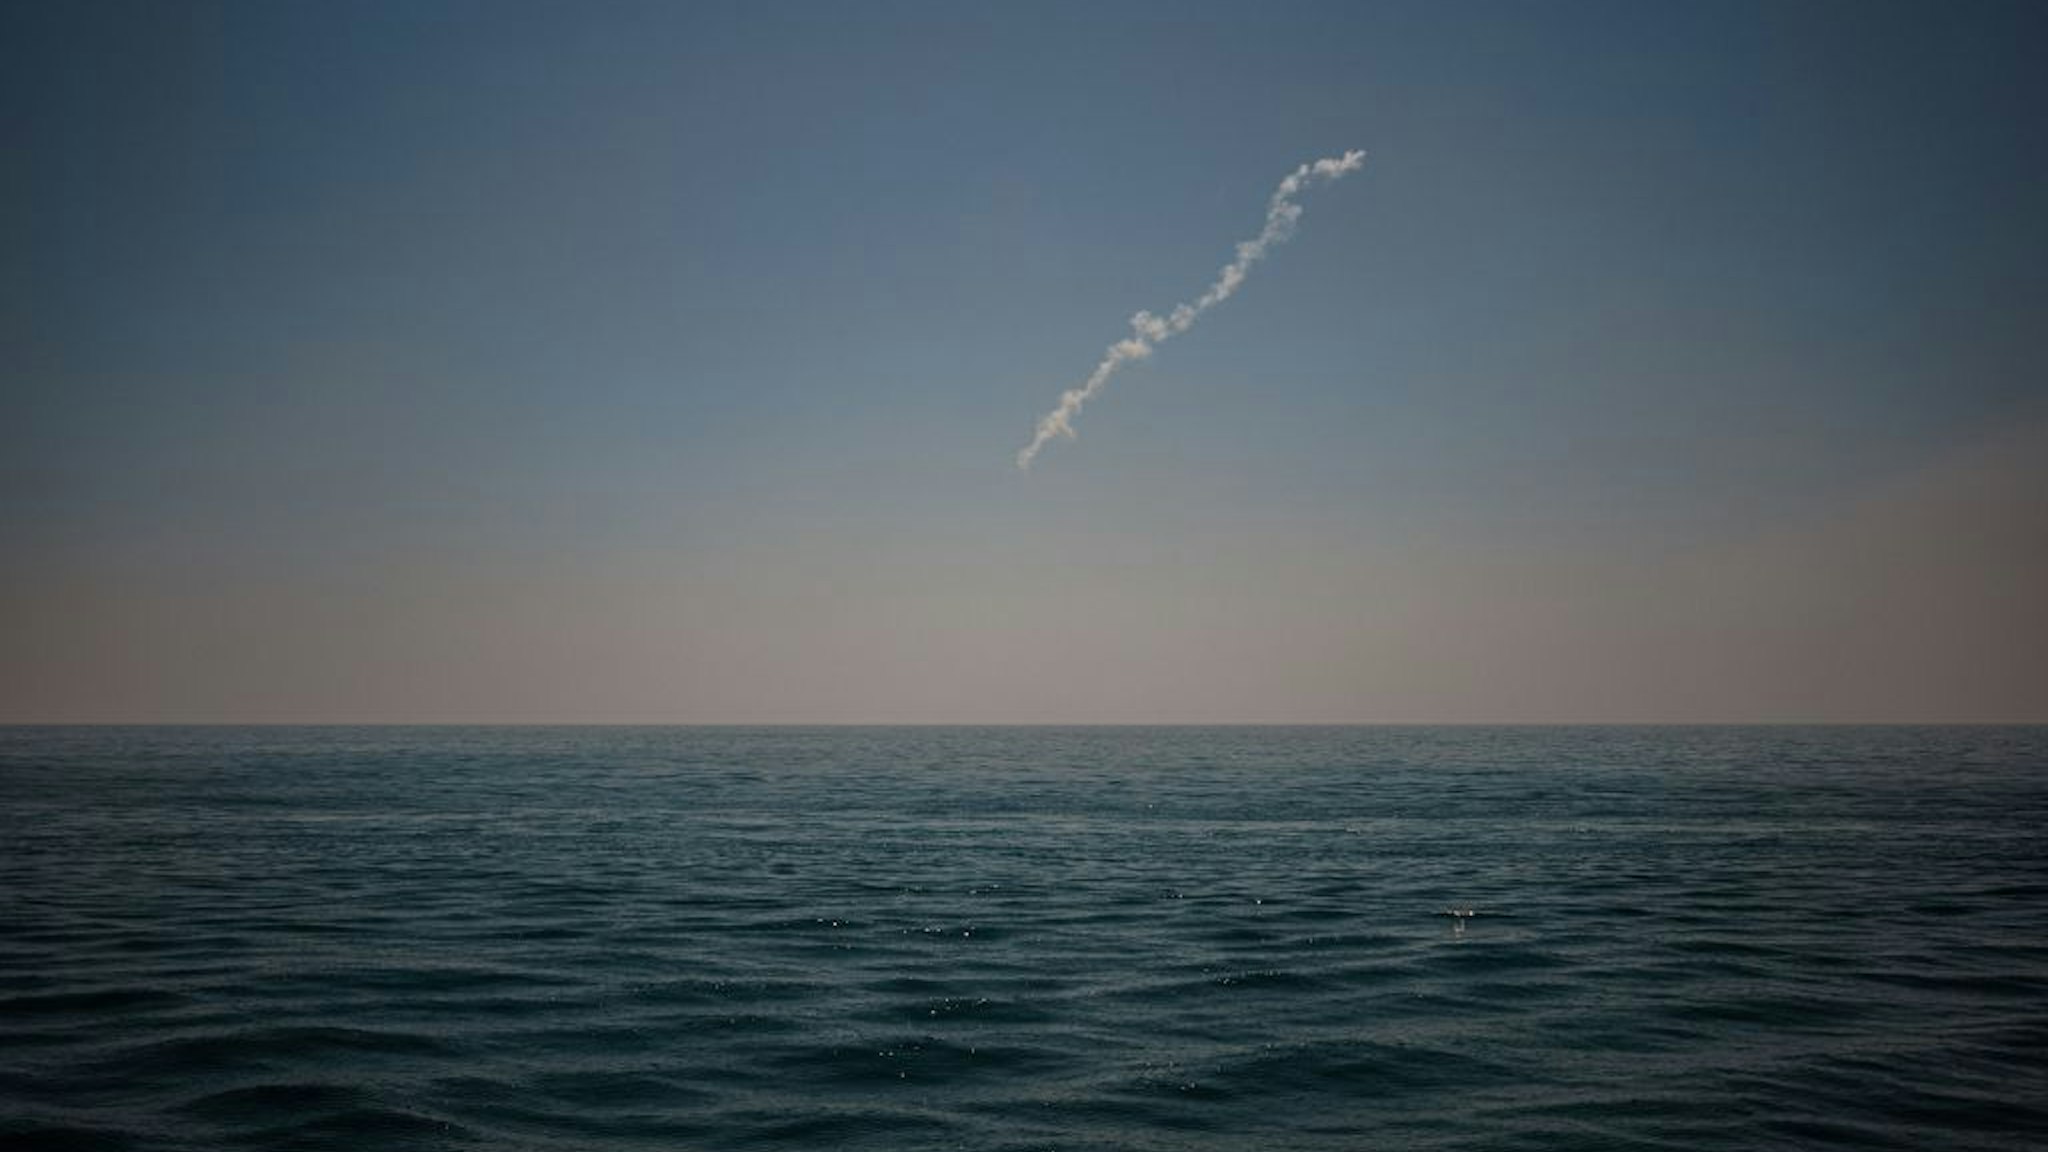 An anti-aircraft missile trail is seen during the Breeze 2022 multinational maritime exercise in the Black Sea on July 22, 2022. (Photo by Dimitar DILKOFF / AFP) (Photo by DIMITAR DILKOFF/AFP via Getty Images)